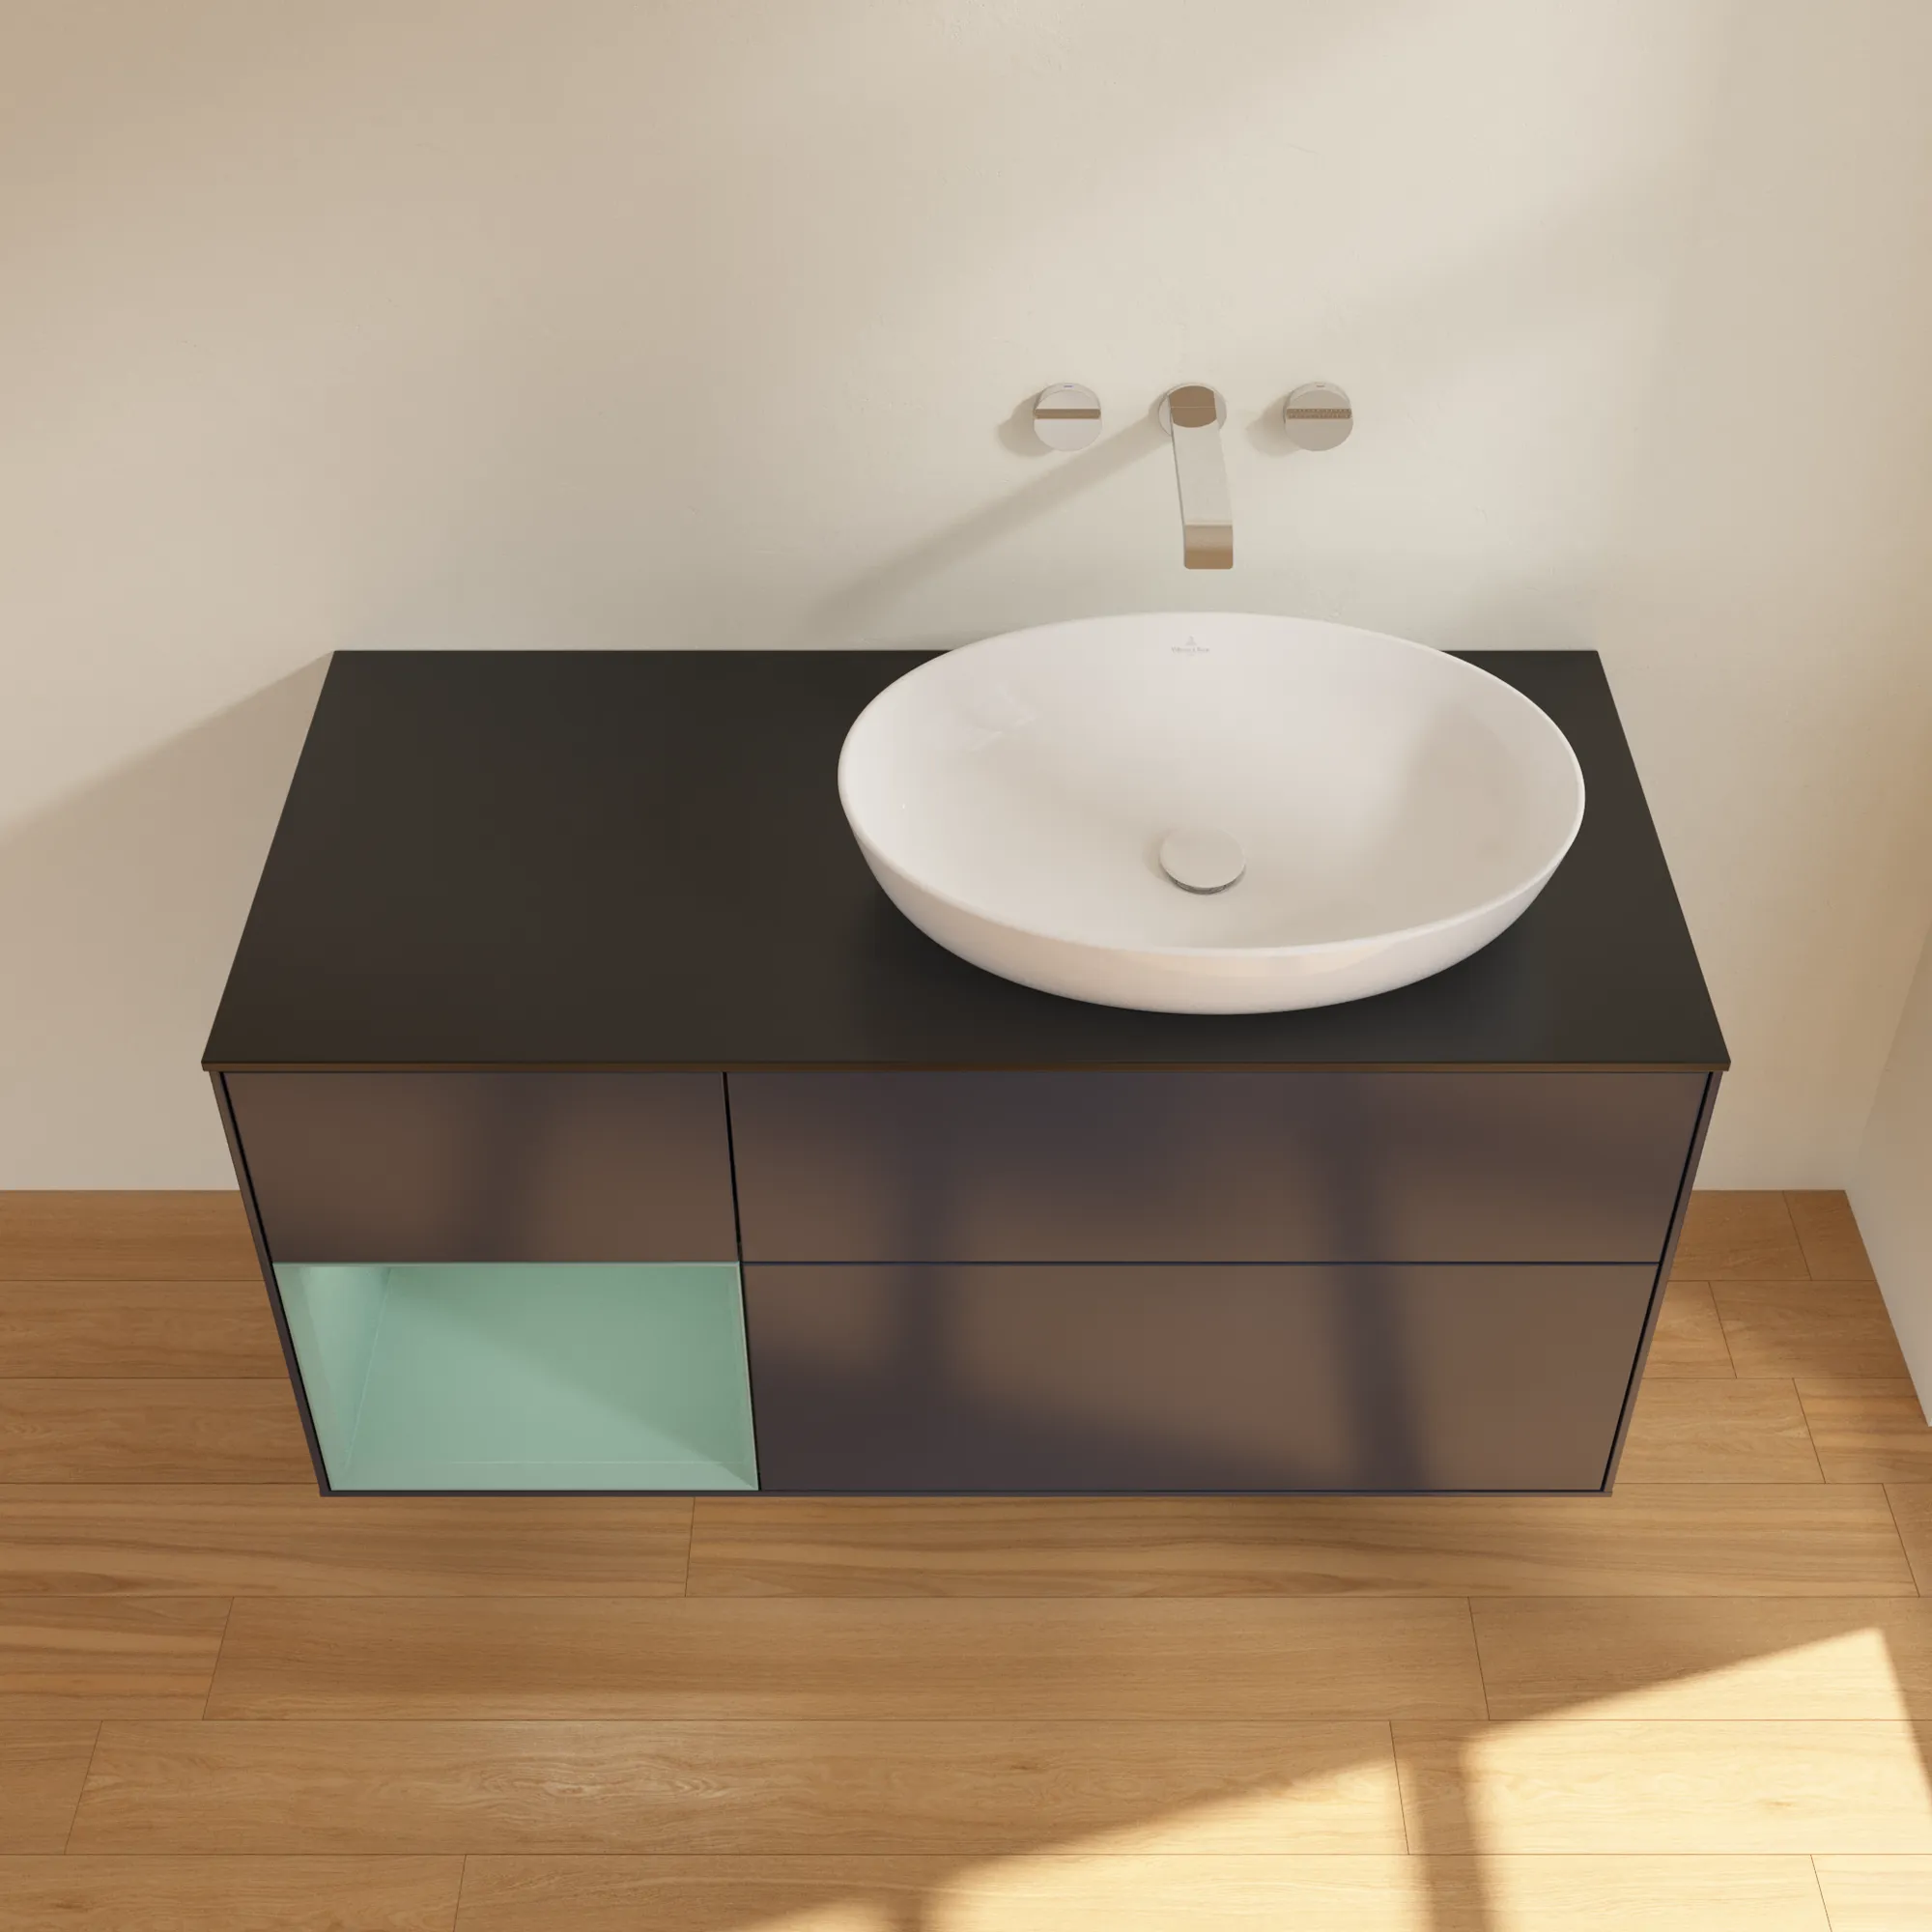 Picture of VILLEROY BOCH Finion Vanity unit, with lighting, 3 pull-out compartments, 1200 x 603 x 501 mm, Midnight Blue Matt Lacquer / Olive Matt Lacquer / Glass Black Matt #FA42GMHG